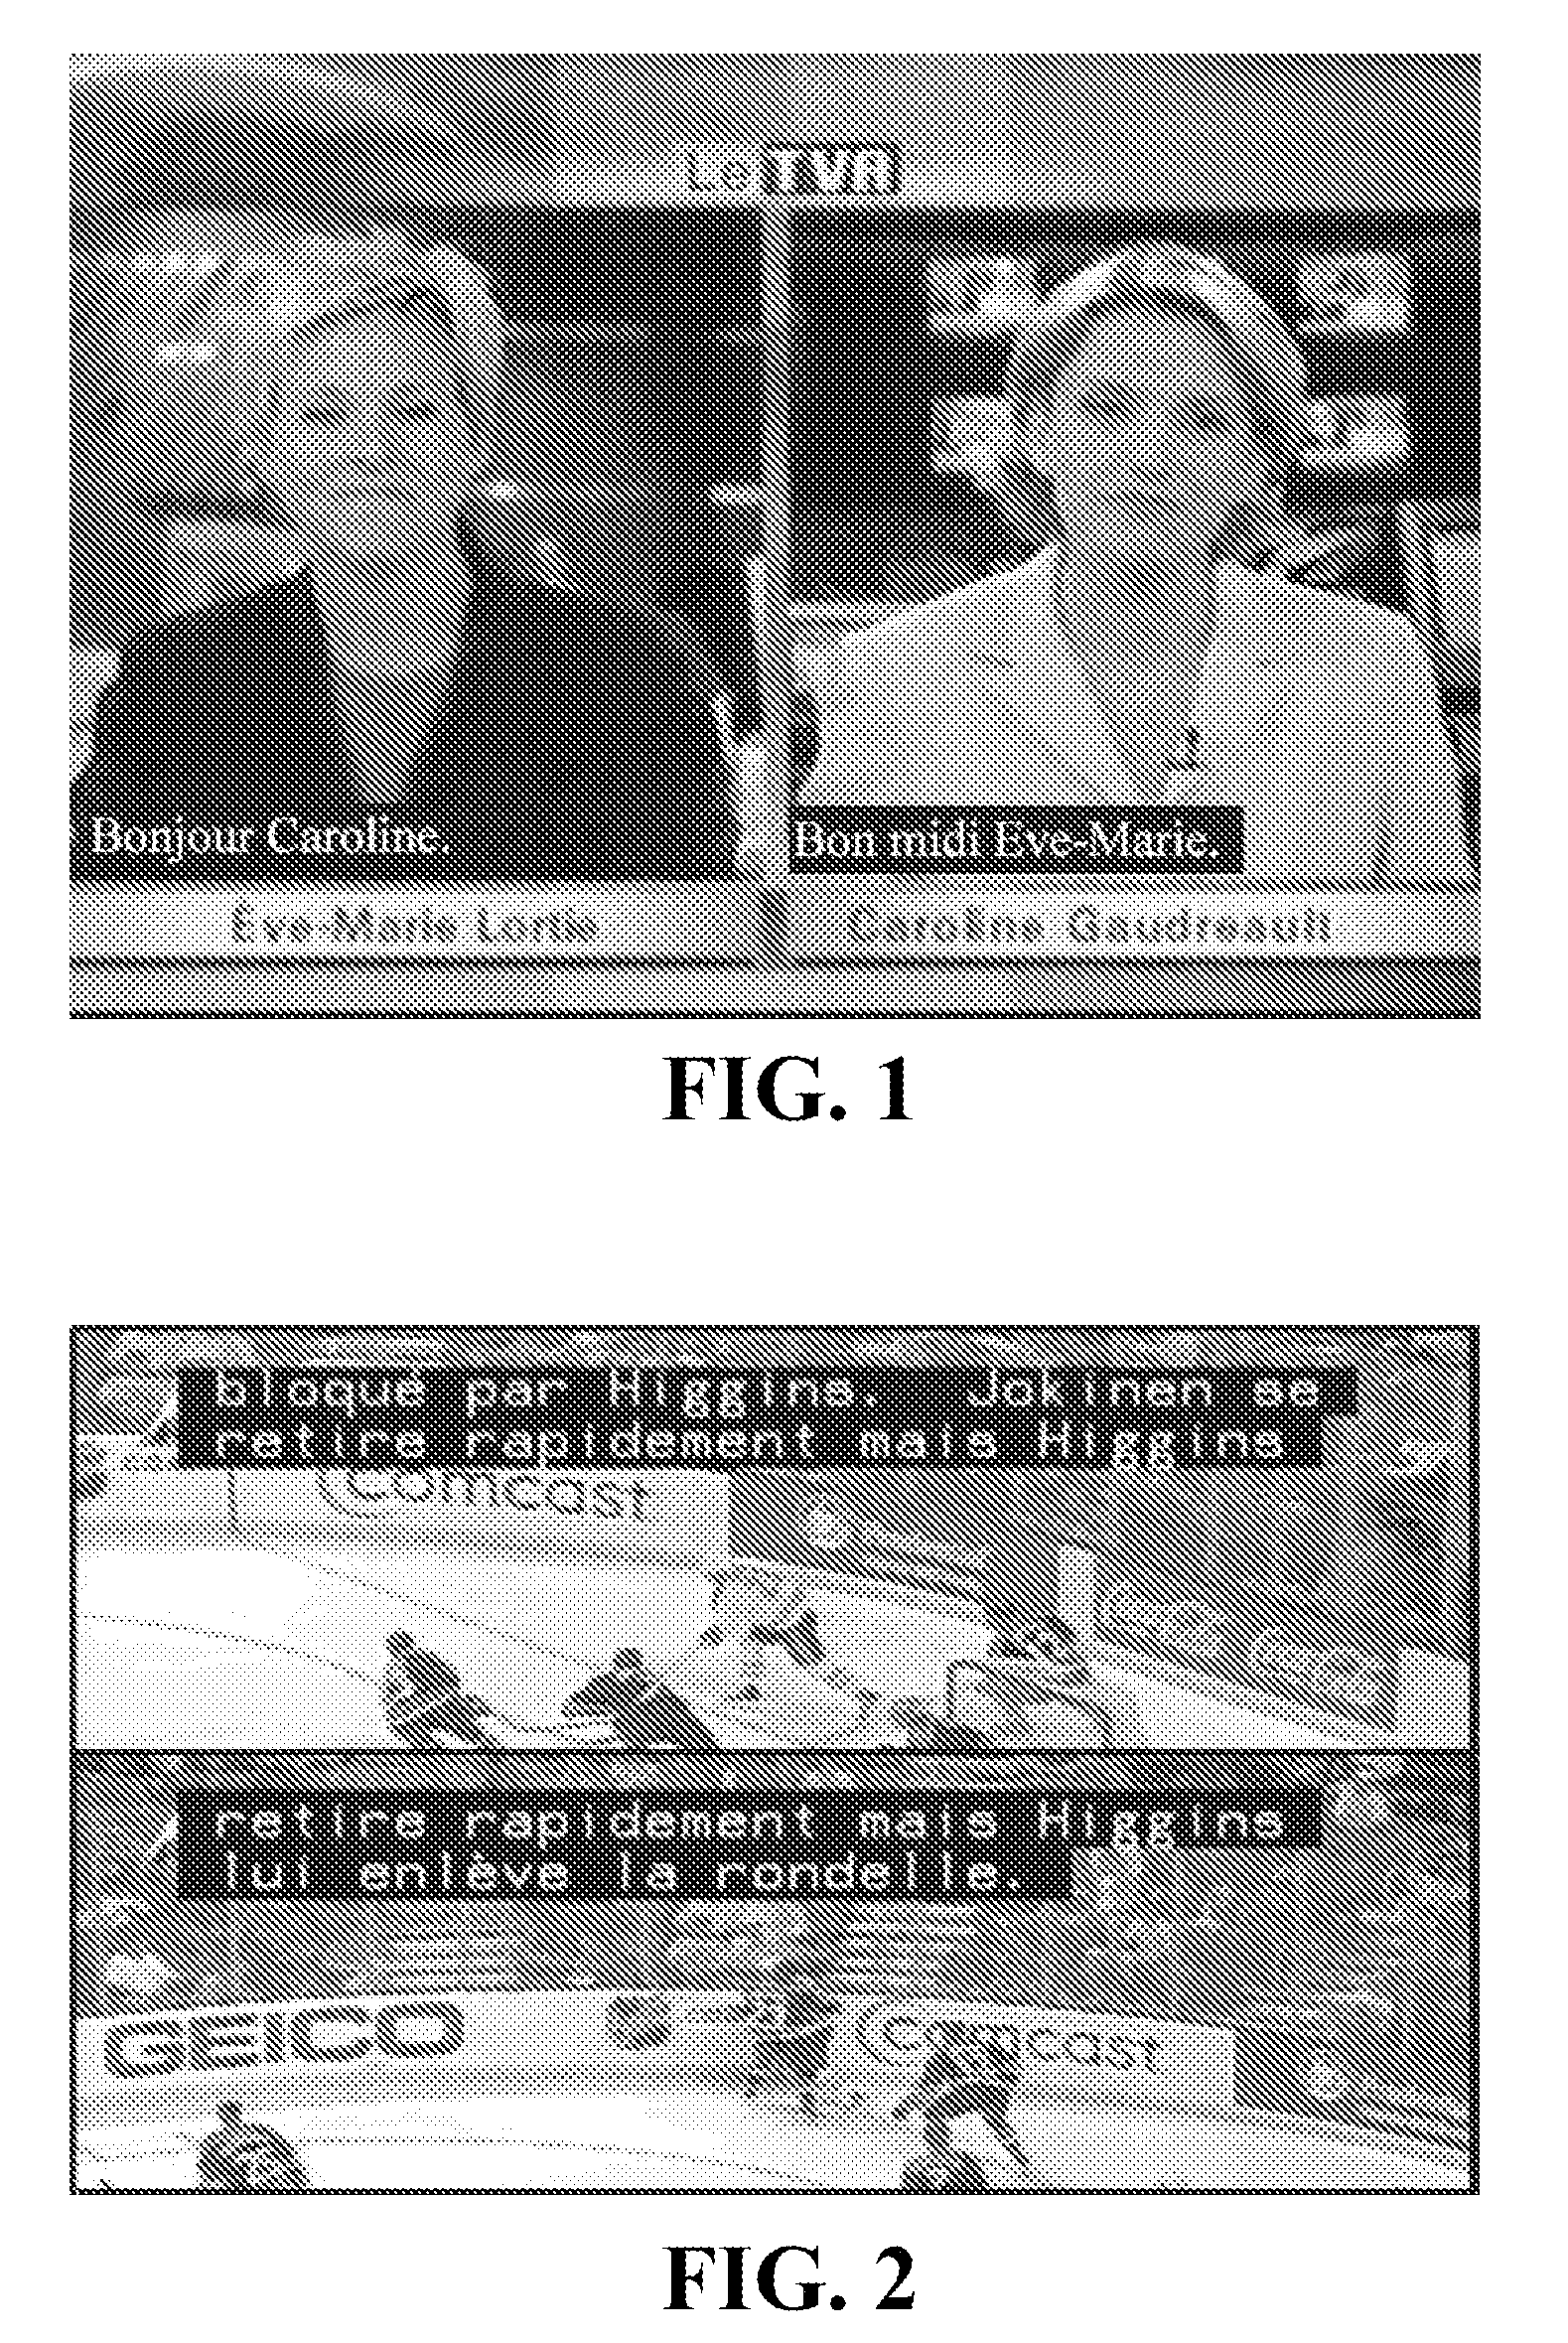 Method and apparatus for caption production